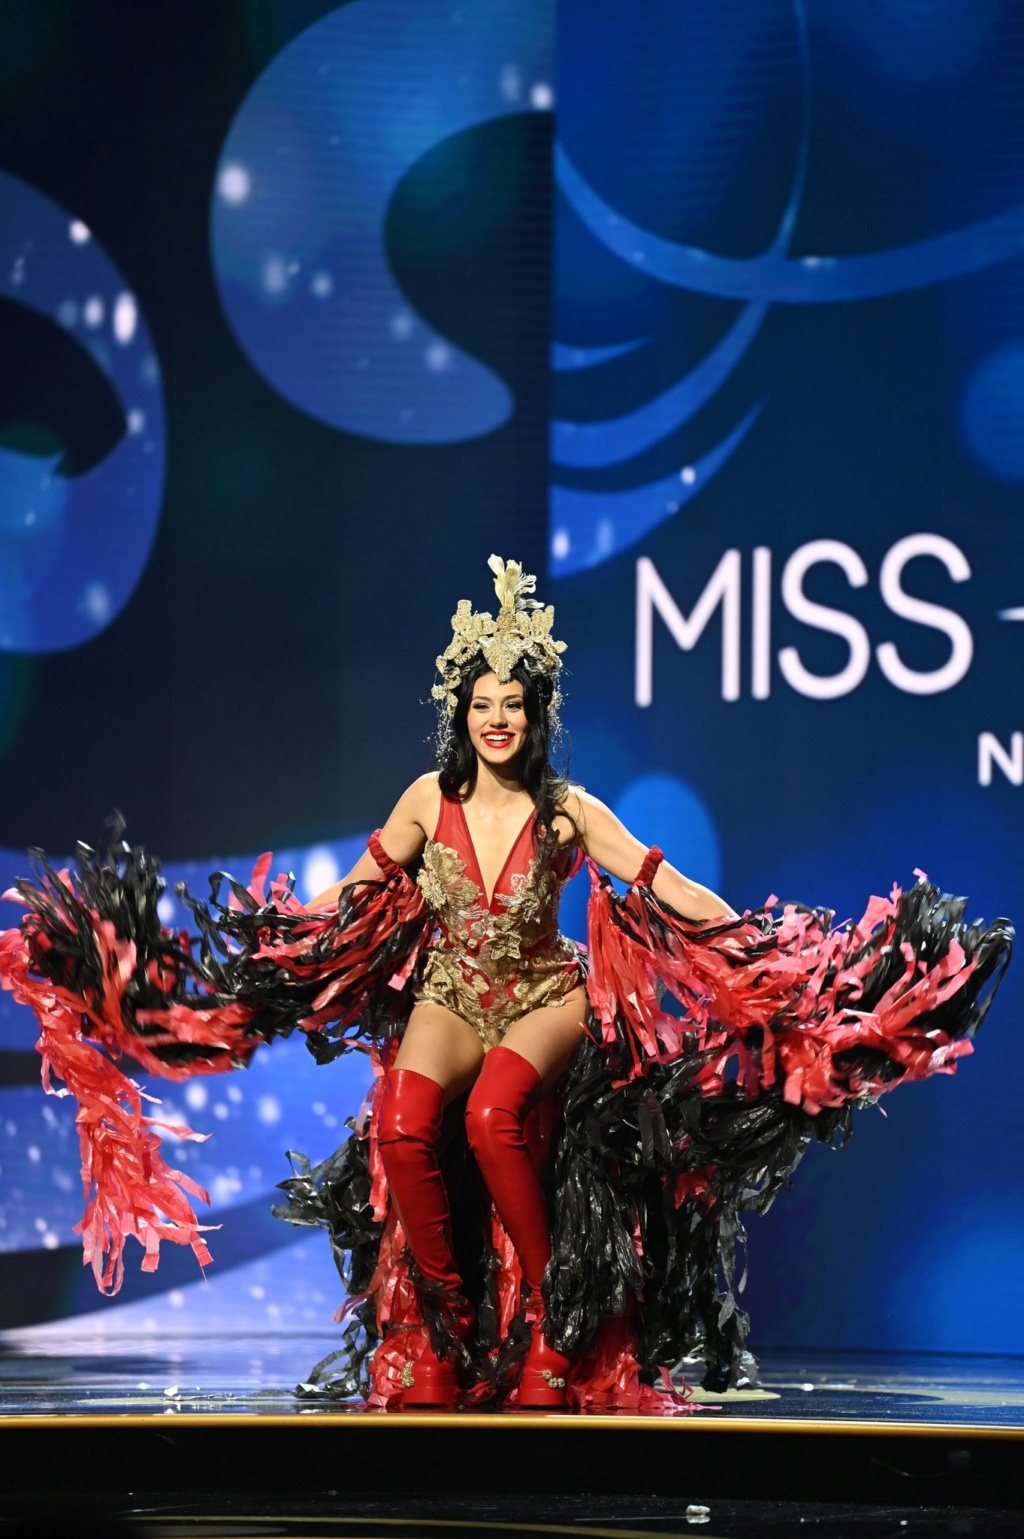  ♔ MISS UNIVERSE 2022 - NATIONAL COSTUME  ♔ - Page 2 32532510